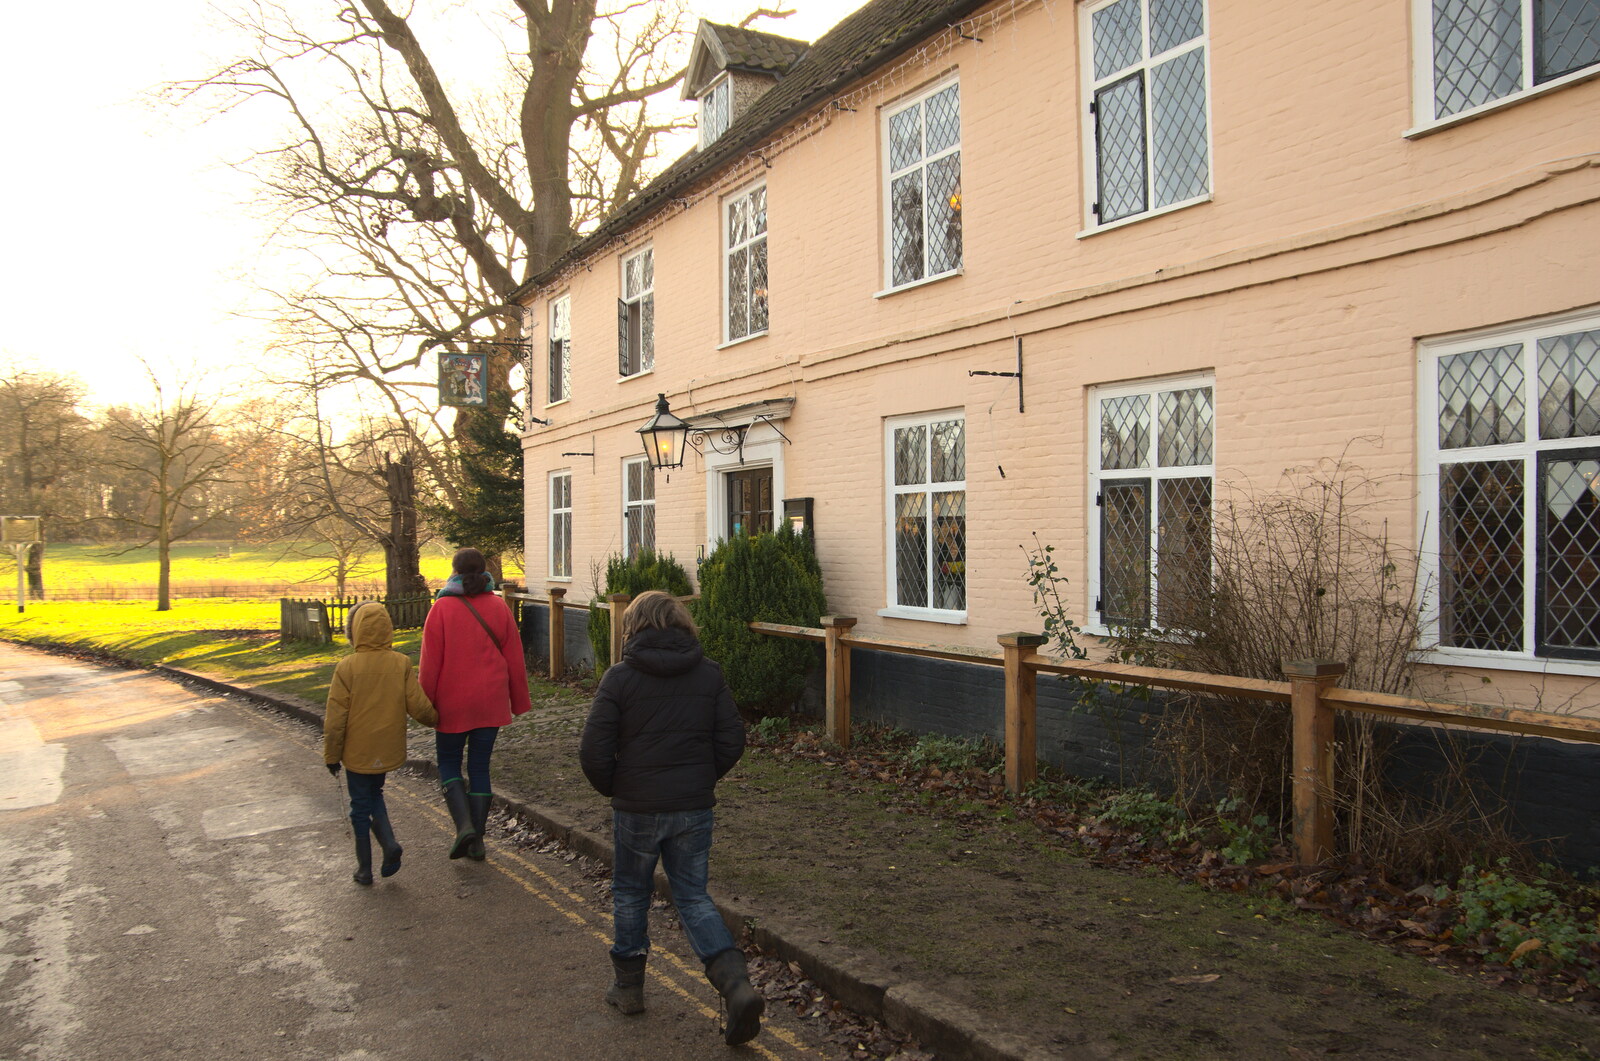 We walk past the Buckinghamshire Arms from A Visit to Blickling Hall, Aylsham, Norfolk - 9th January 2022